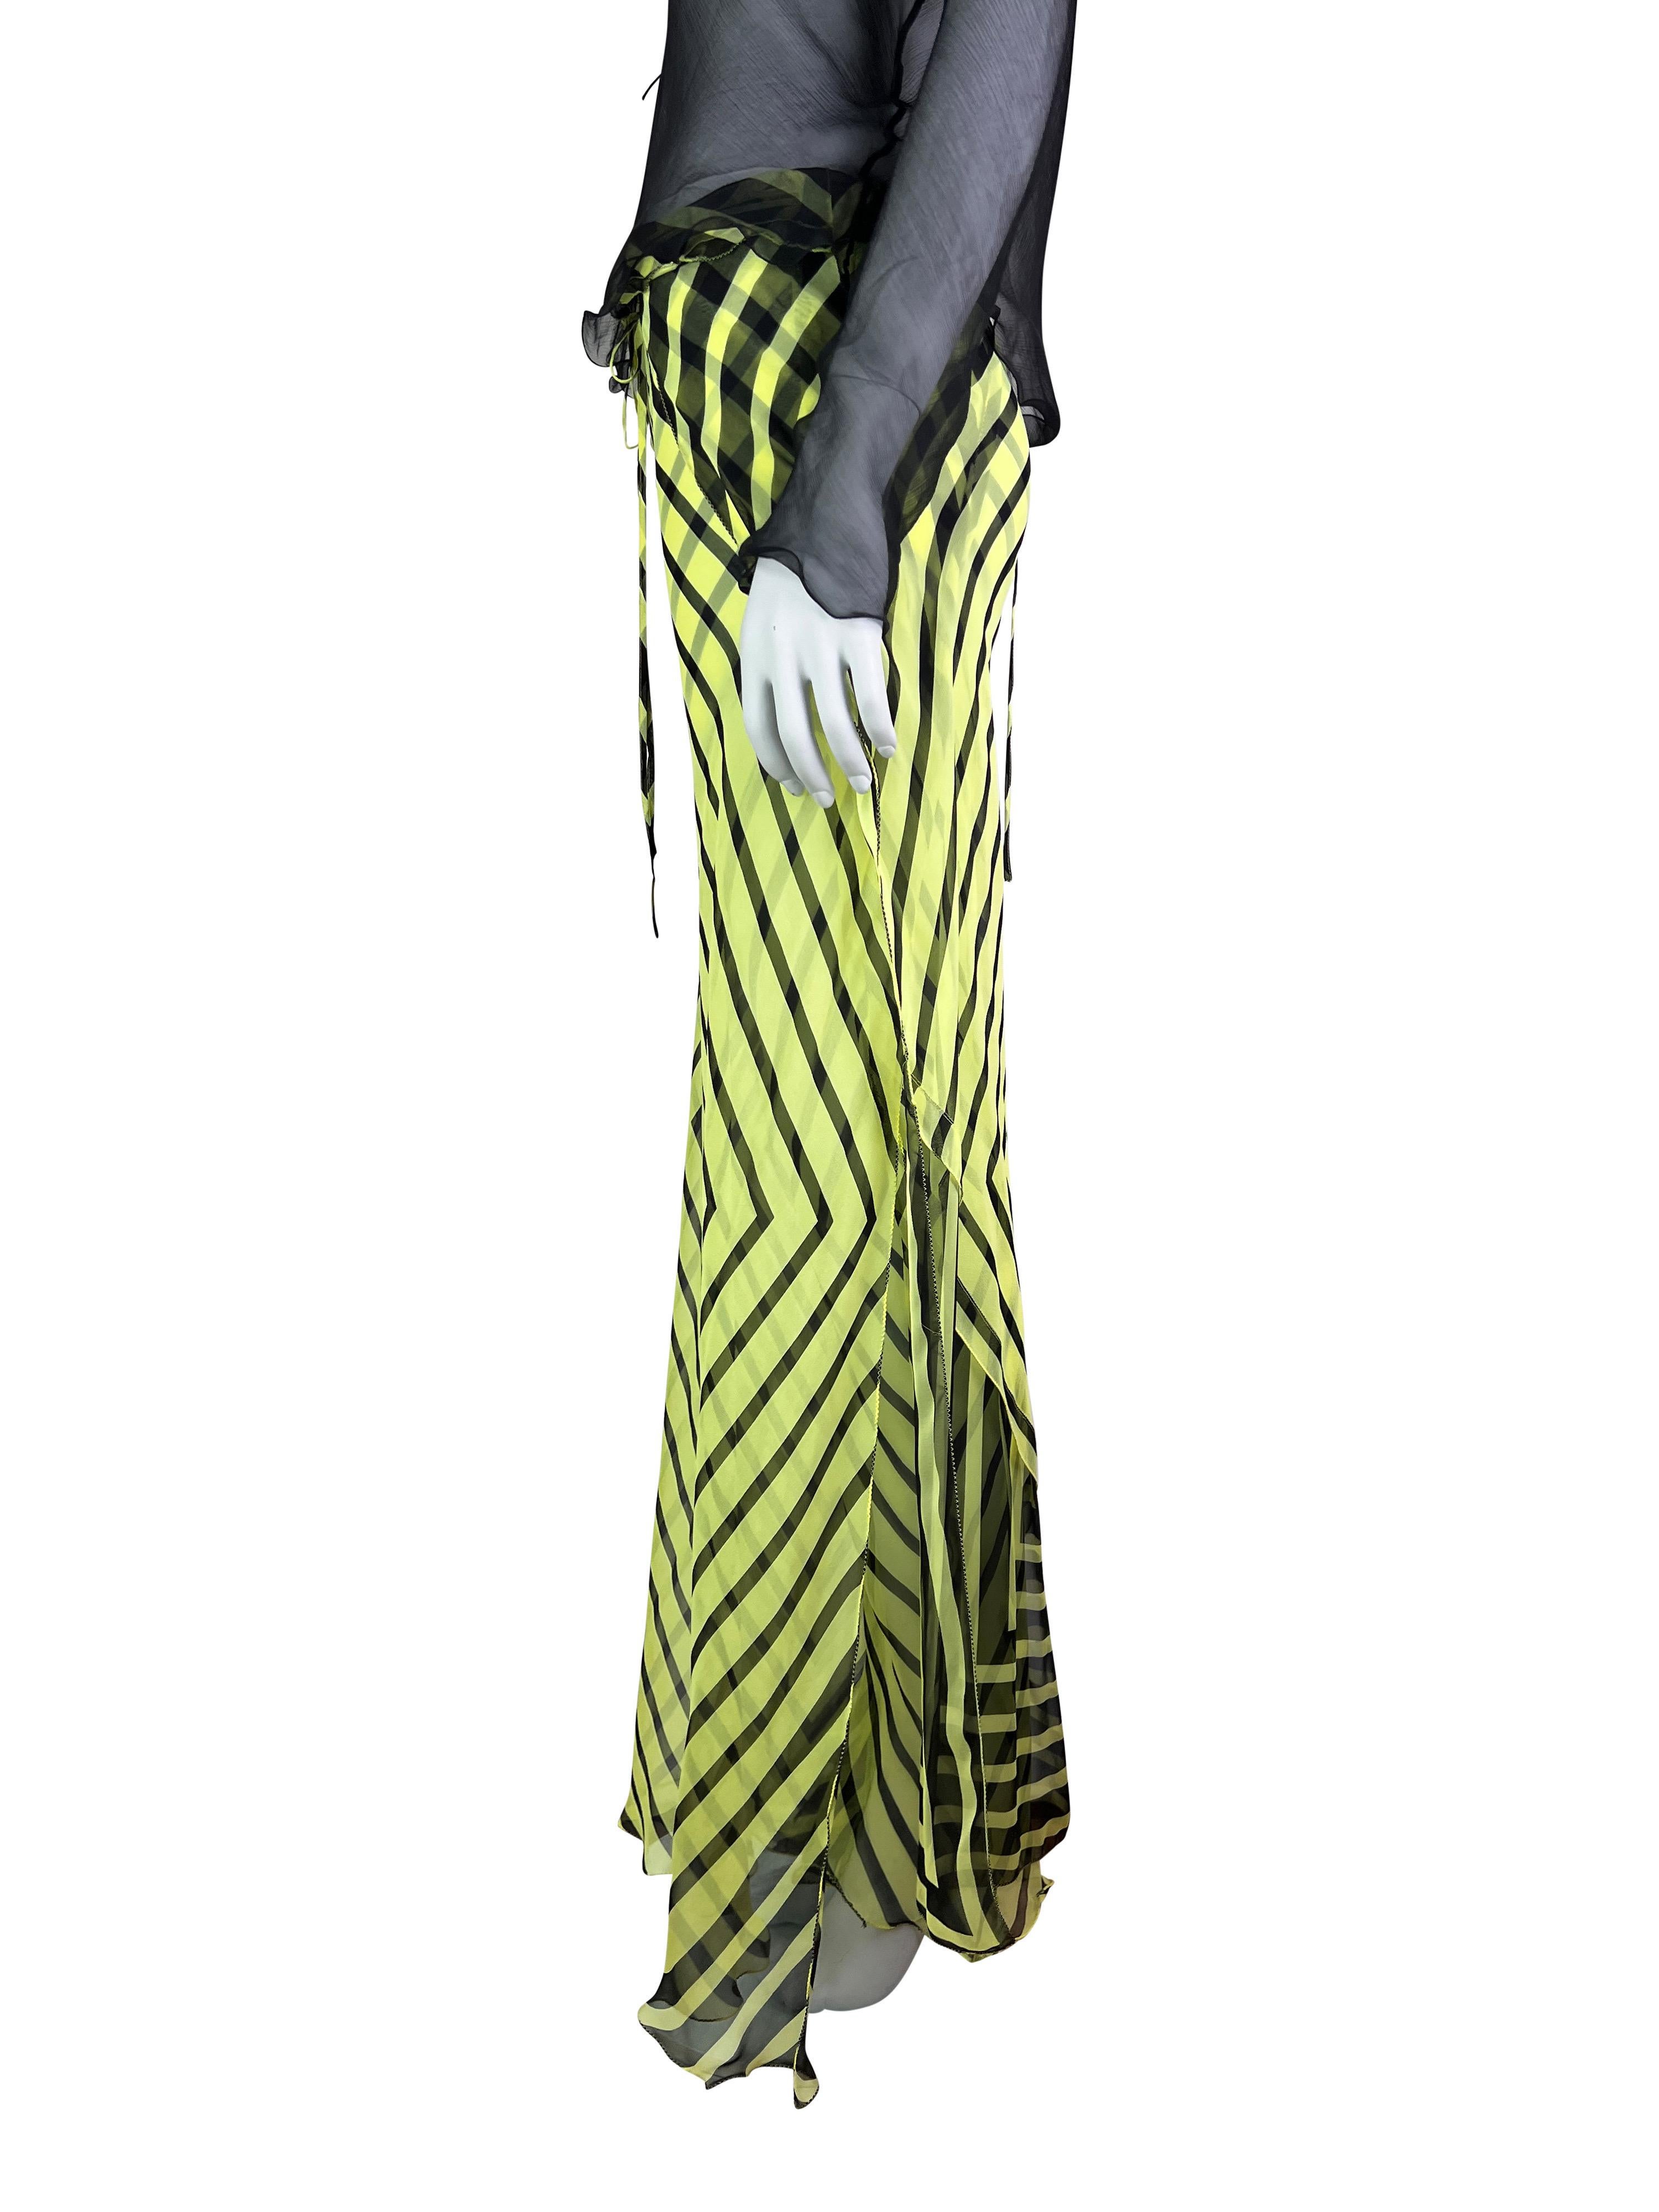 Fendi by Karl Lagerfeld Spring 2000 Doubled Layered Graphic Lime Bias-Cut Silk T For Sale 6